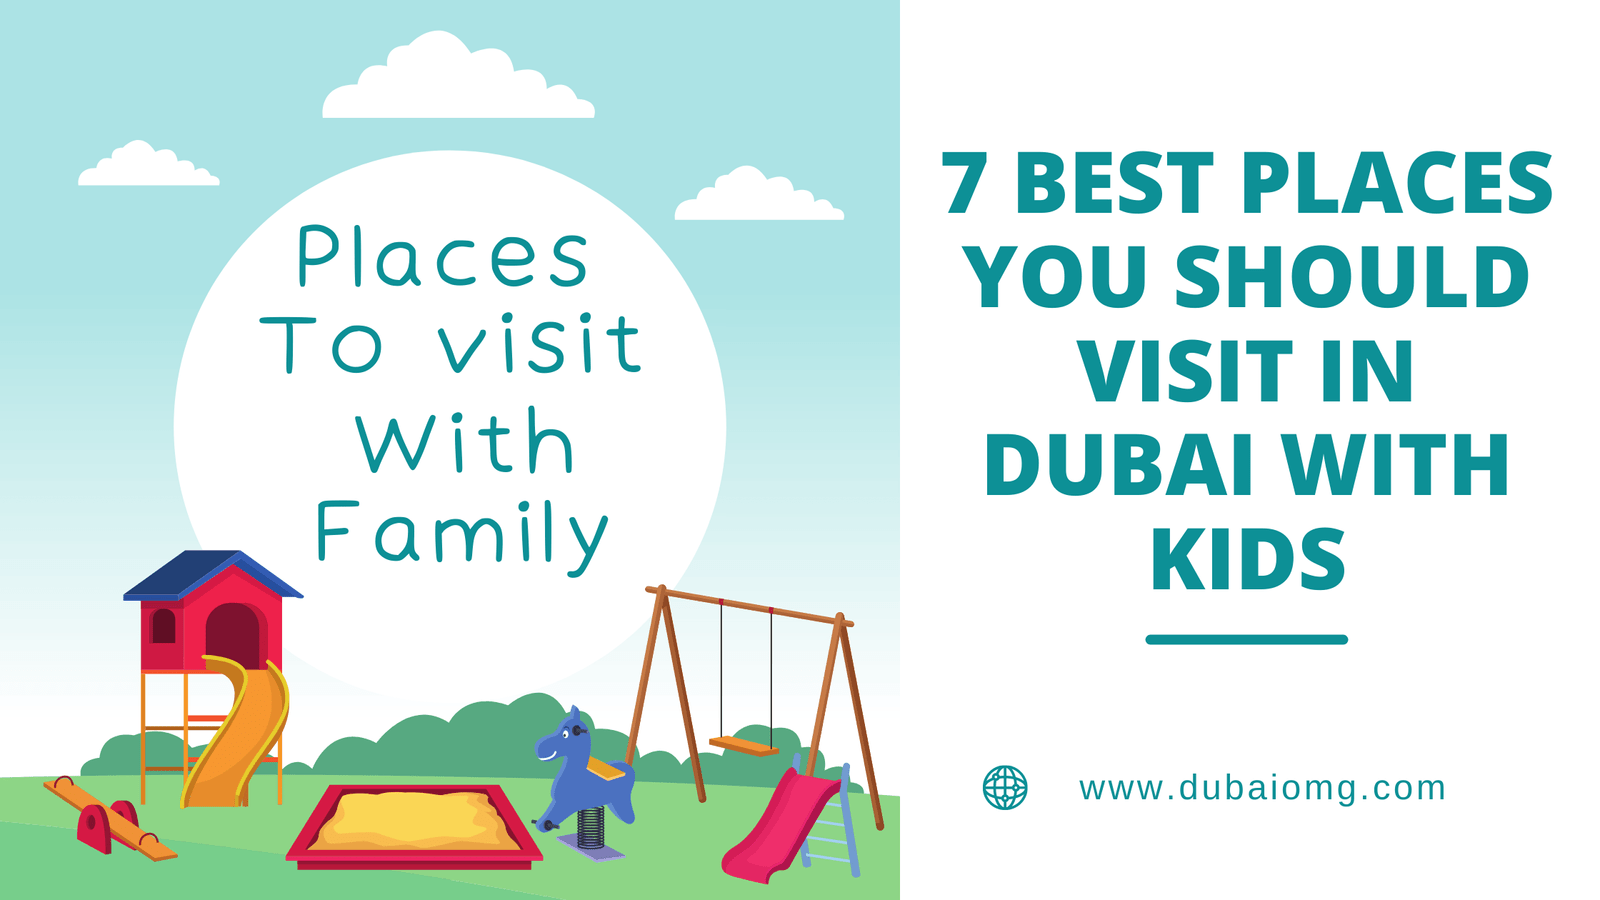 7 Best Places You Should visit In Dubai With Kids